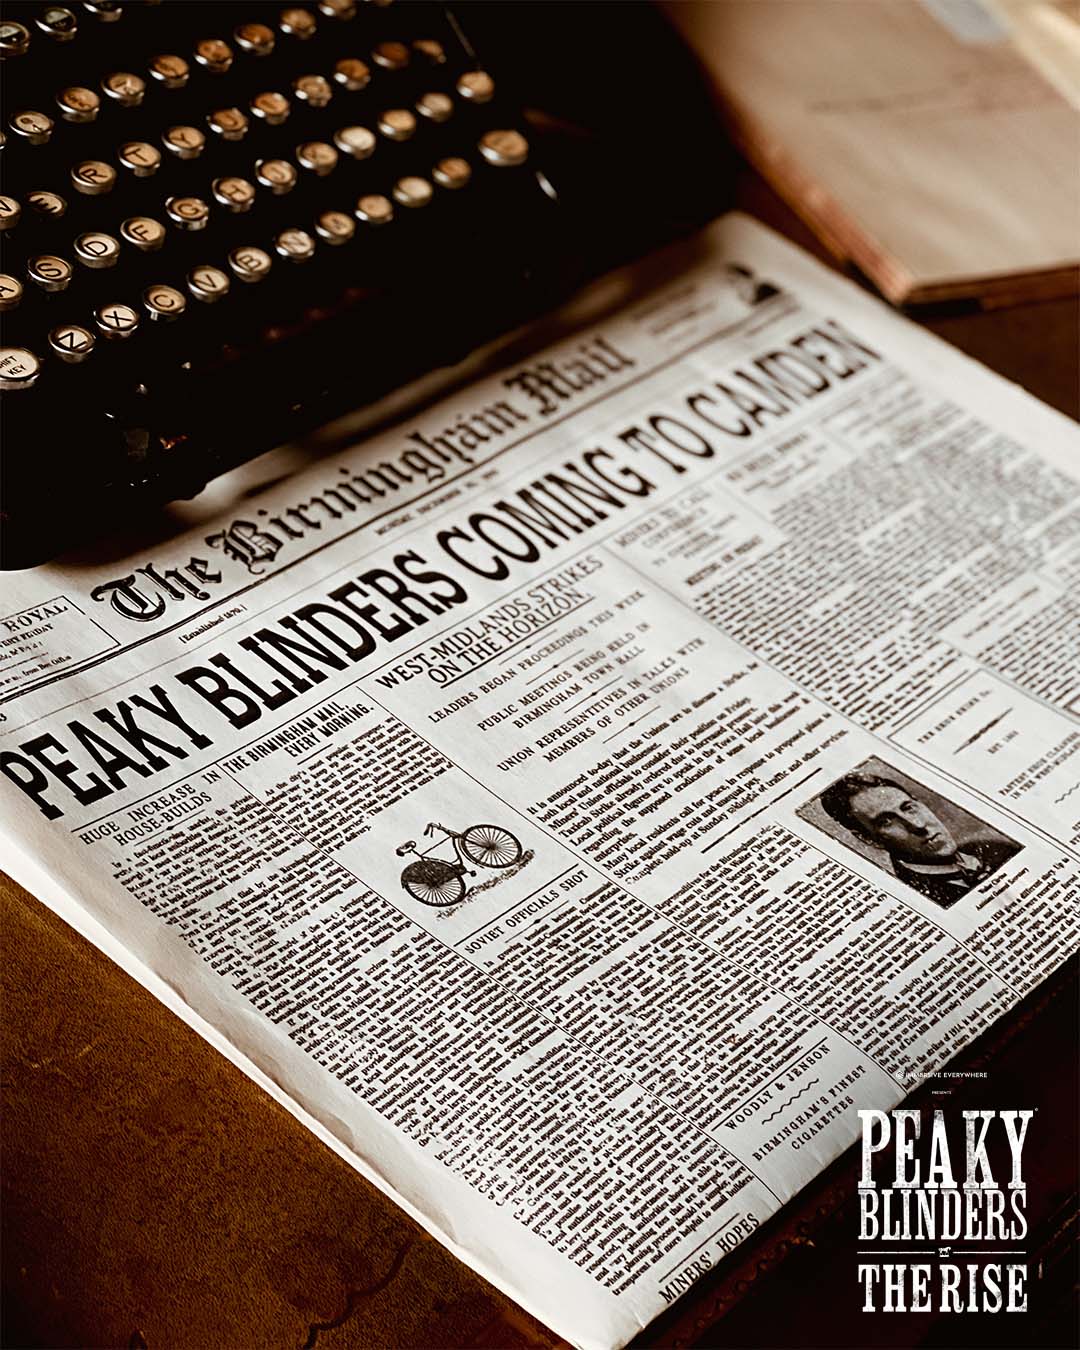 Peaky Blinders On Twitter Tickets Are Now On Sale For The Immersive Theatre Show Peaky 